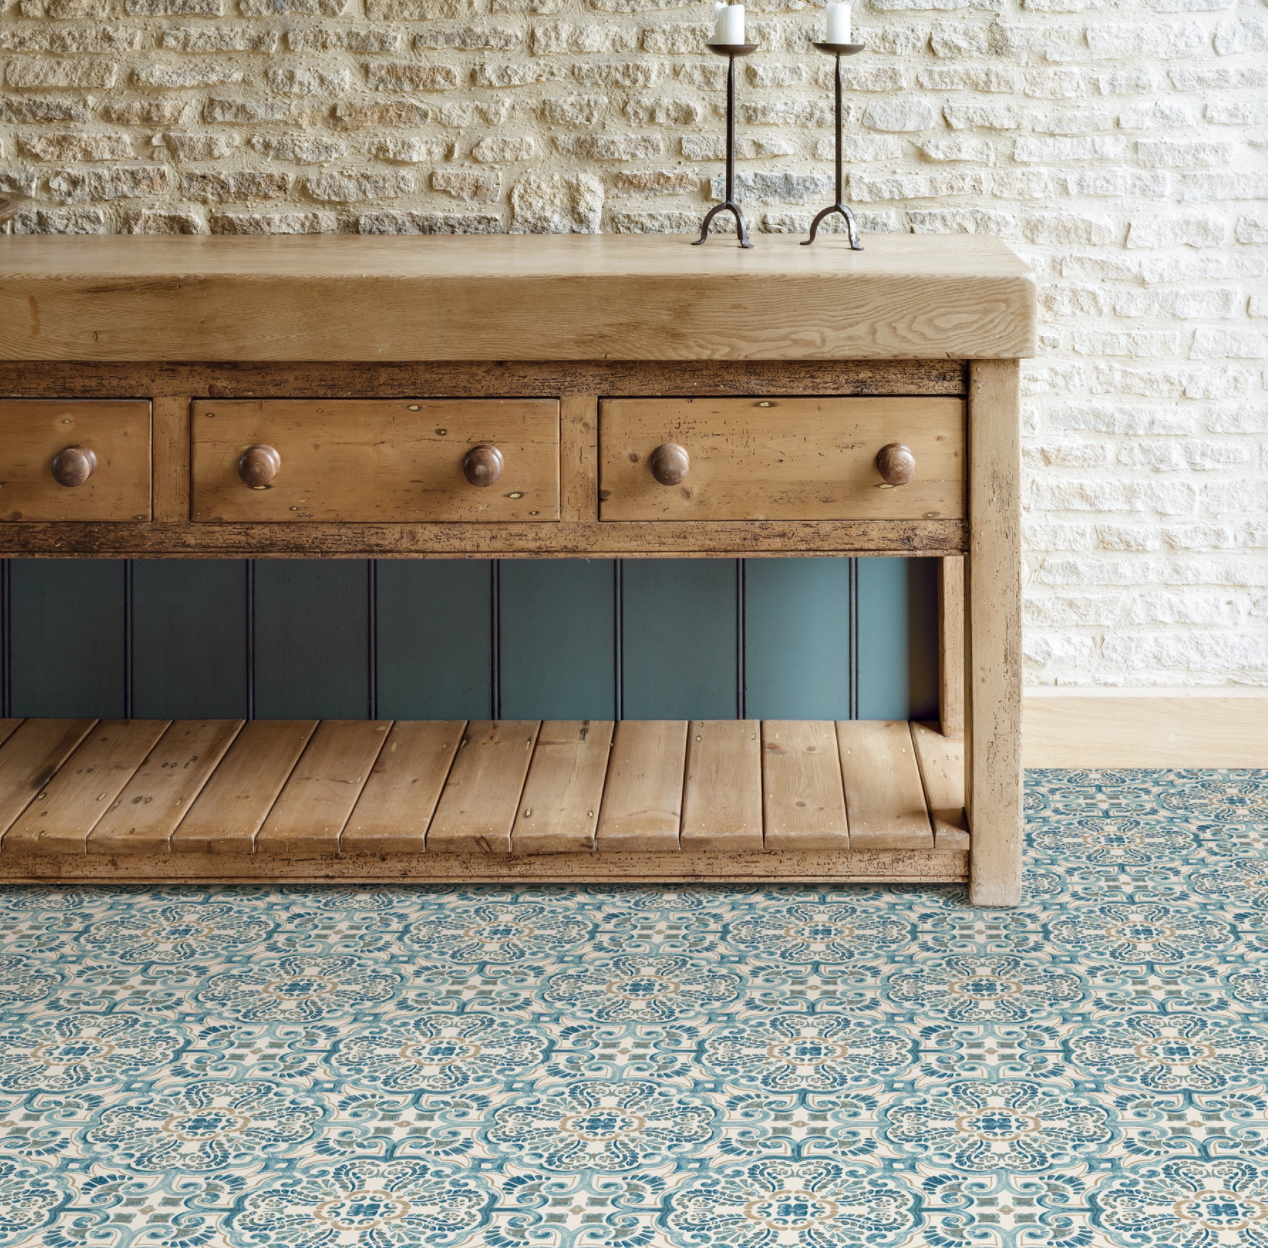 Blue, tan, and white, Moroccan inspired peel-and-stick floor tiles